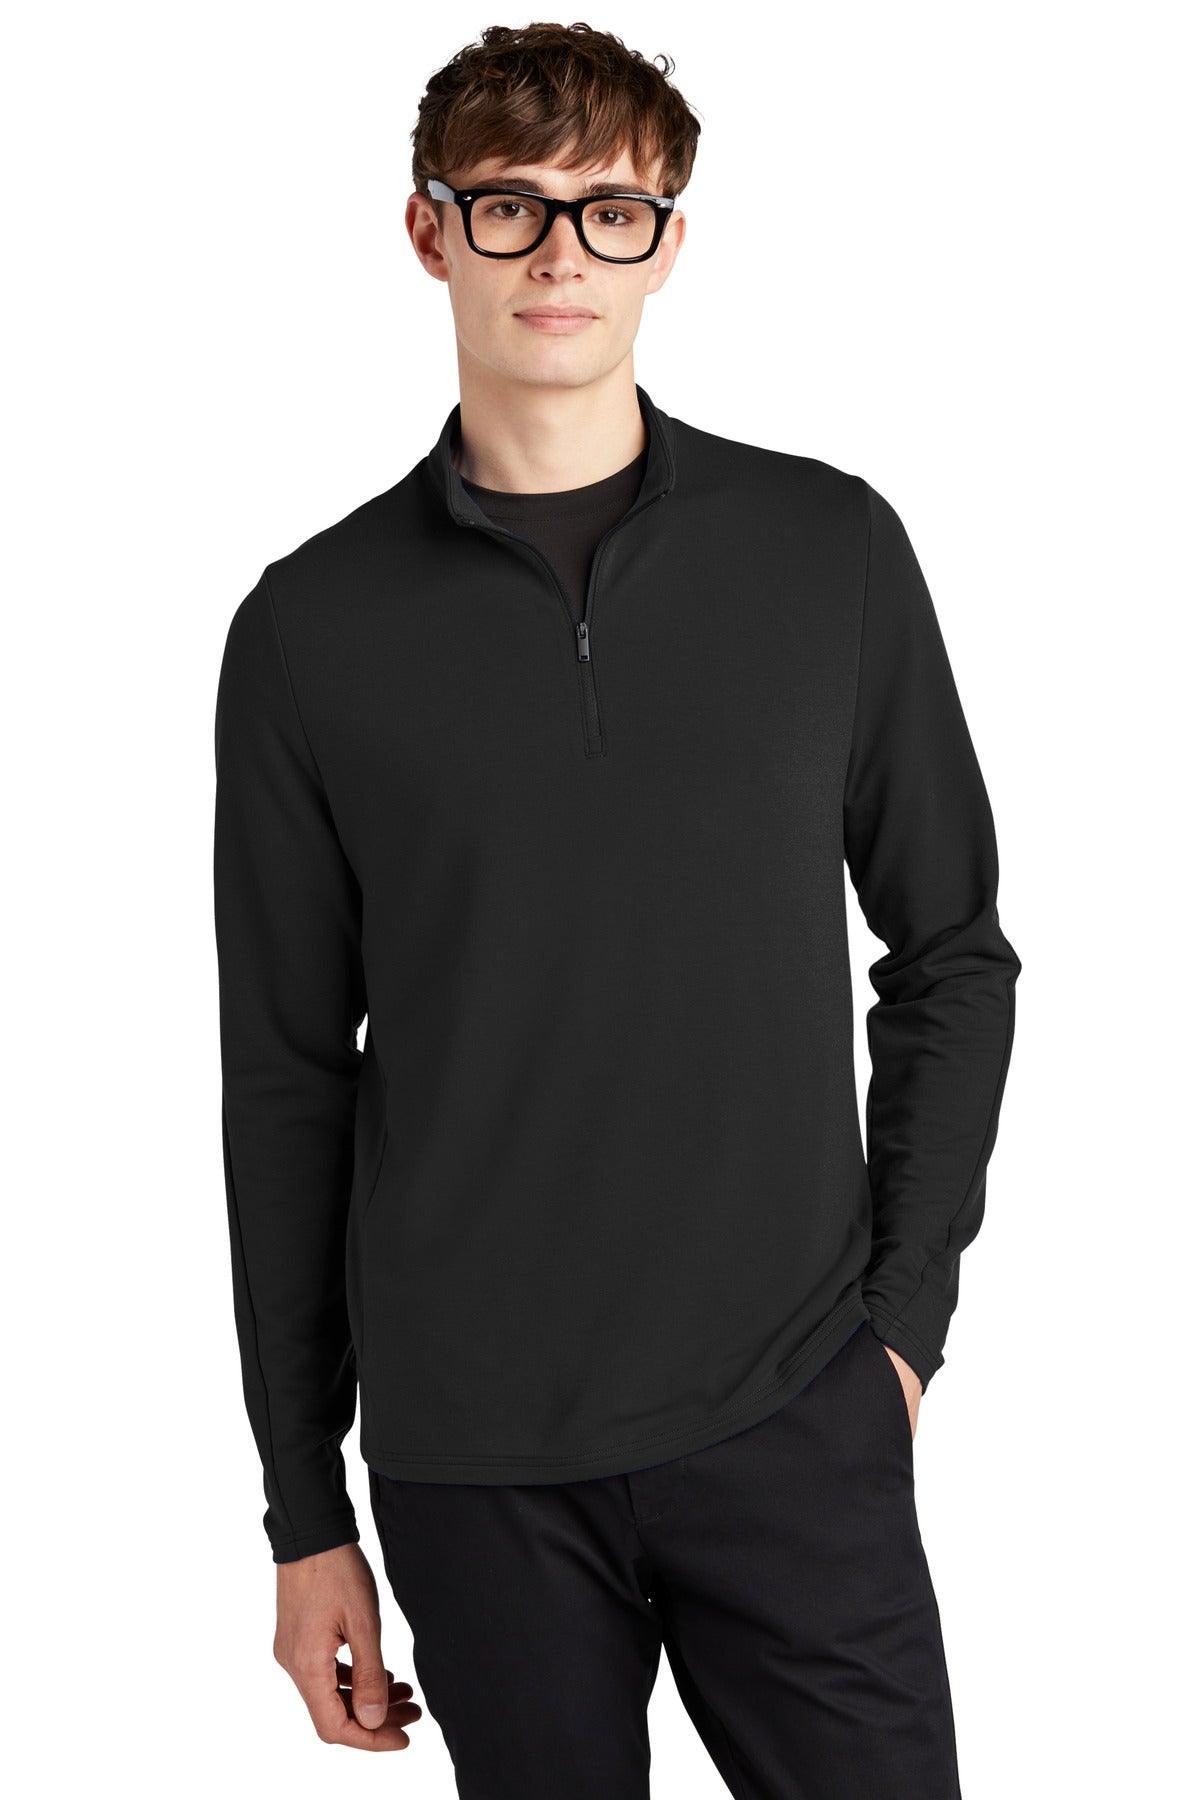 Mercer+Mettle Stretch 1/4-Zip Pullover MM3010 - Dresses Max